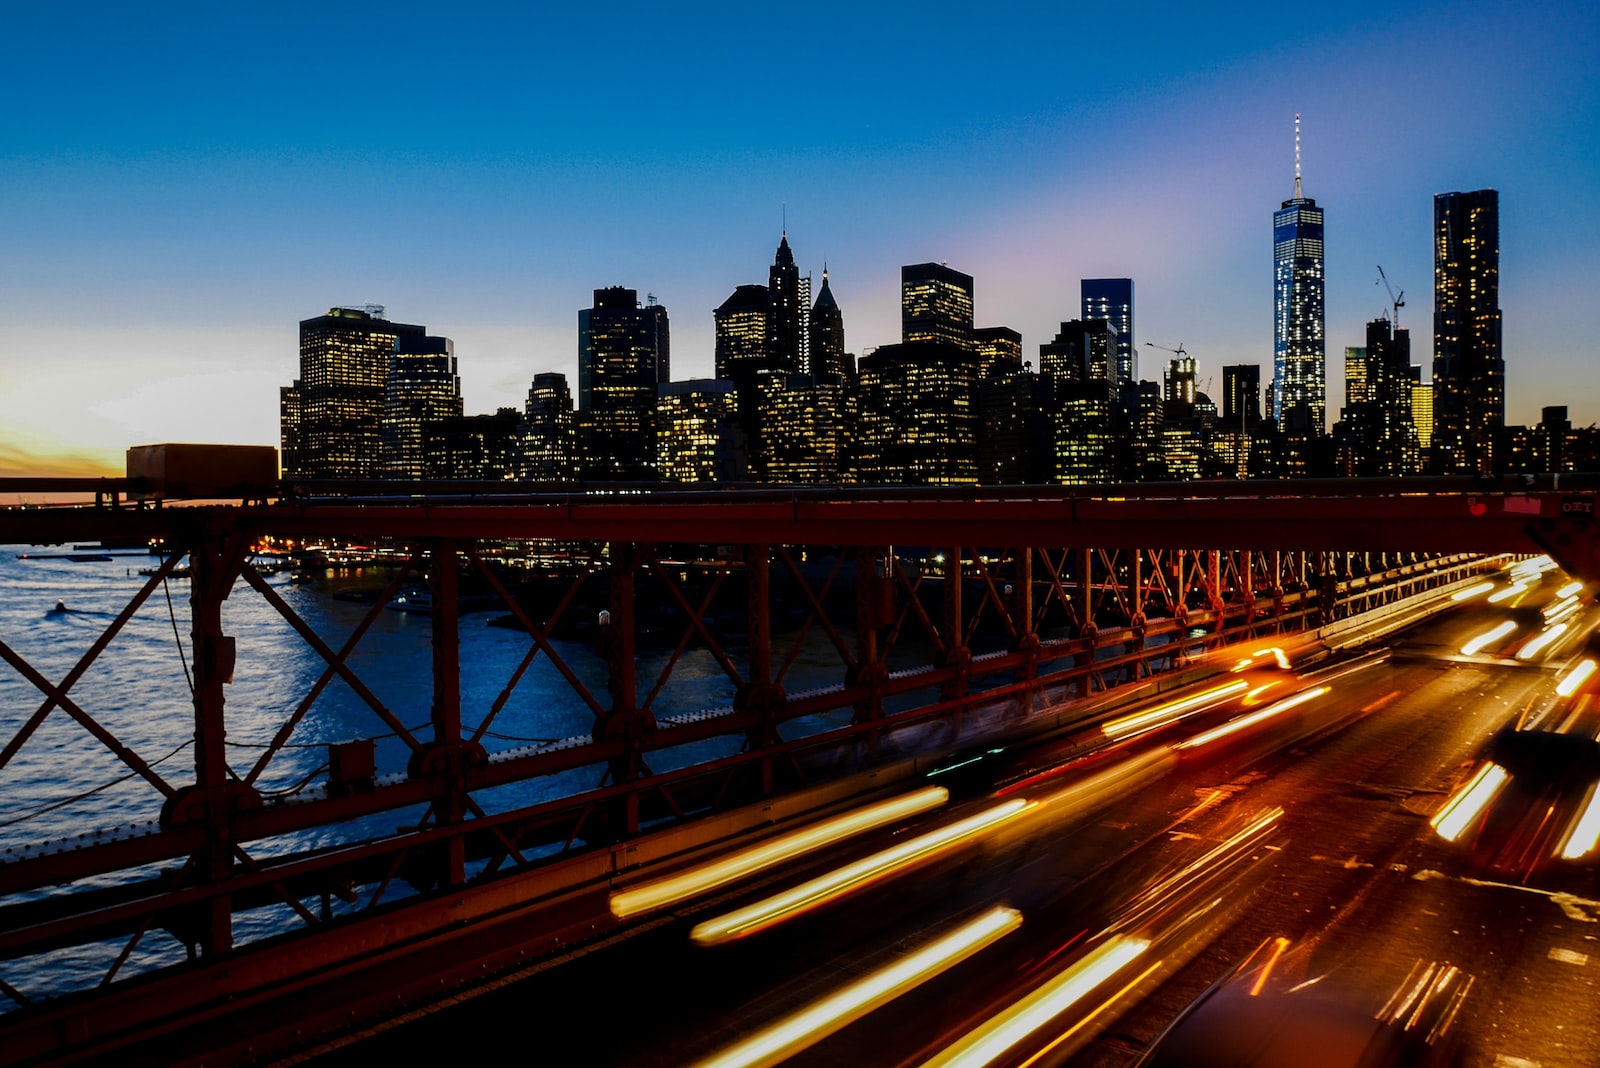 A long-exposure shot of light trails on the freeway with the New York city skyline at the back